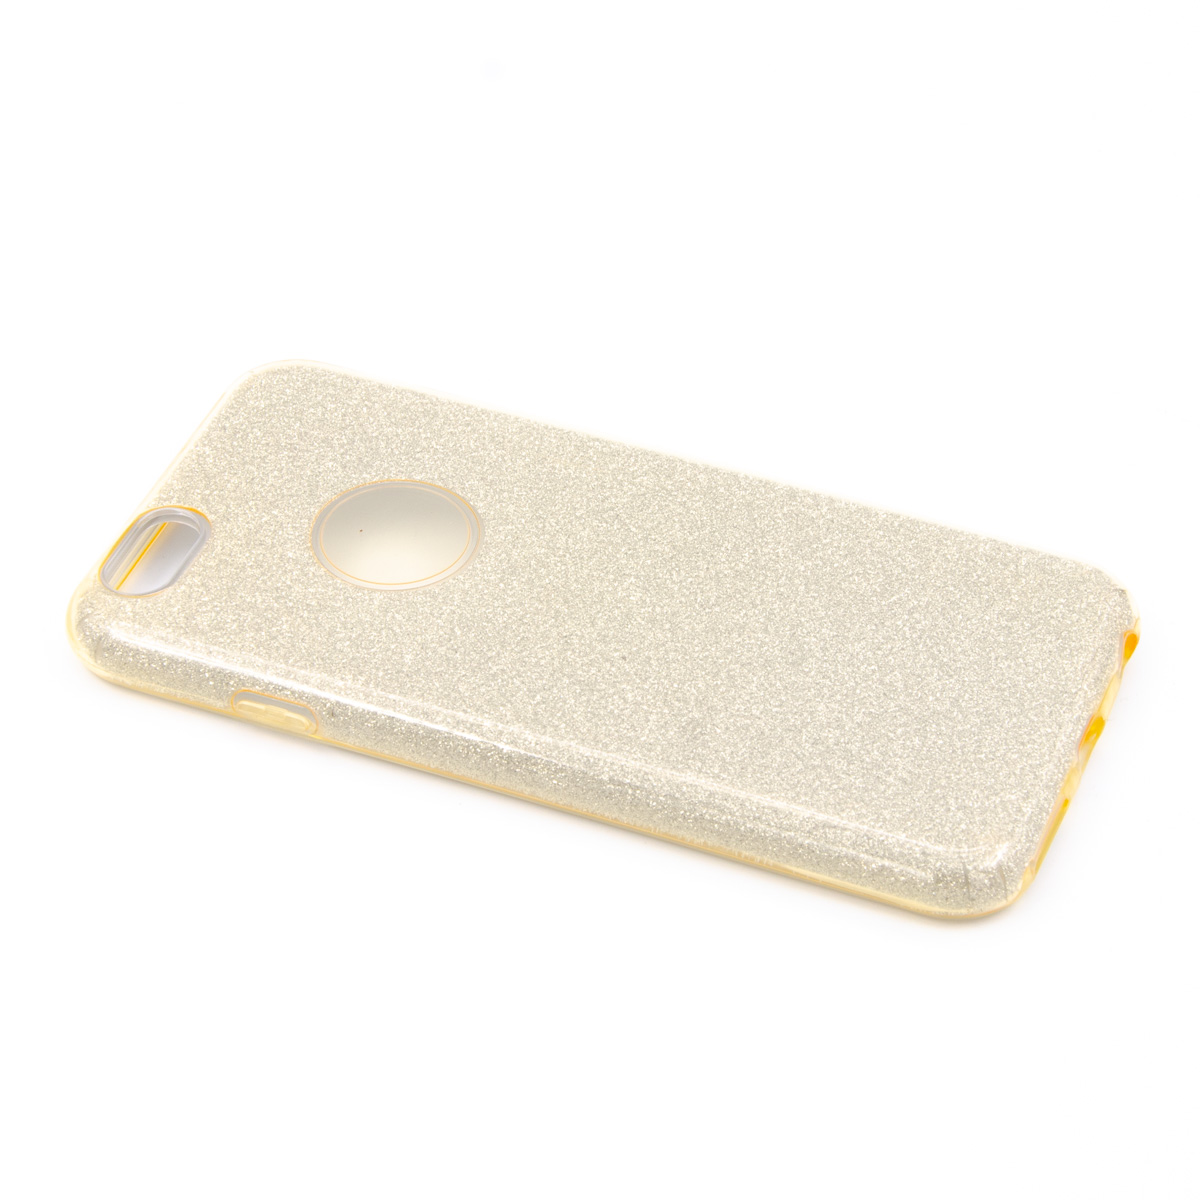 Tpu sparkly shine for iphone 6 (4.7") gold